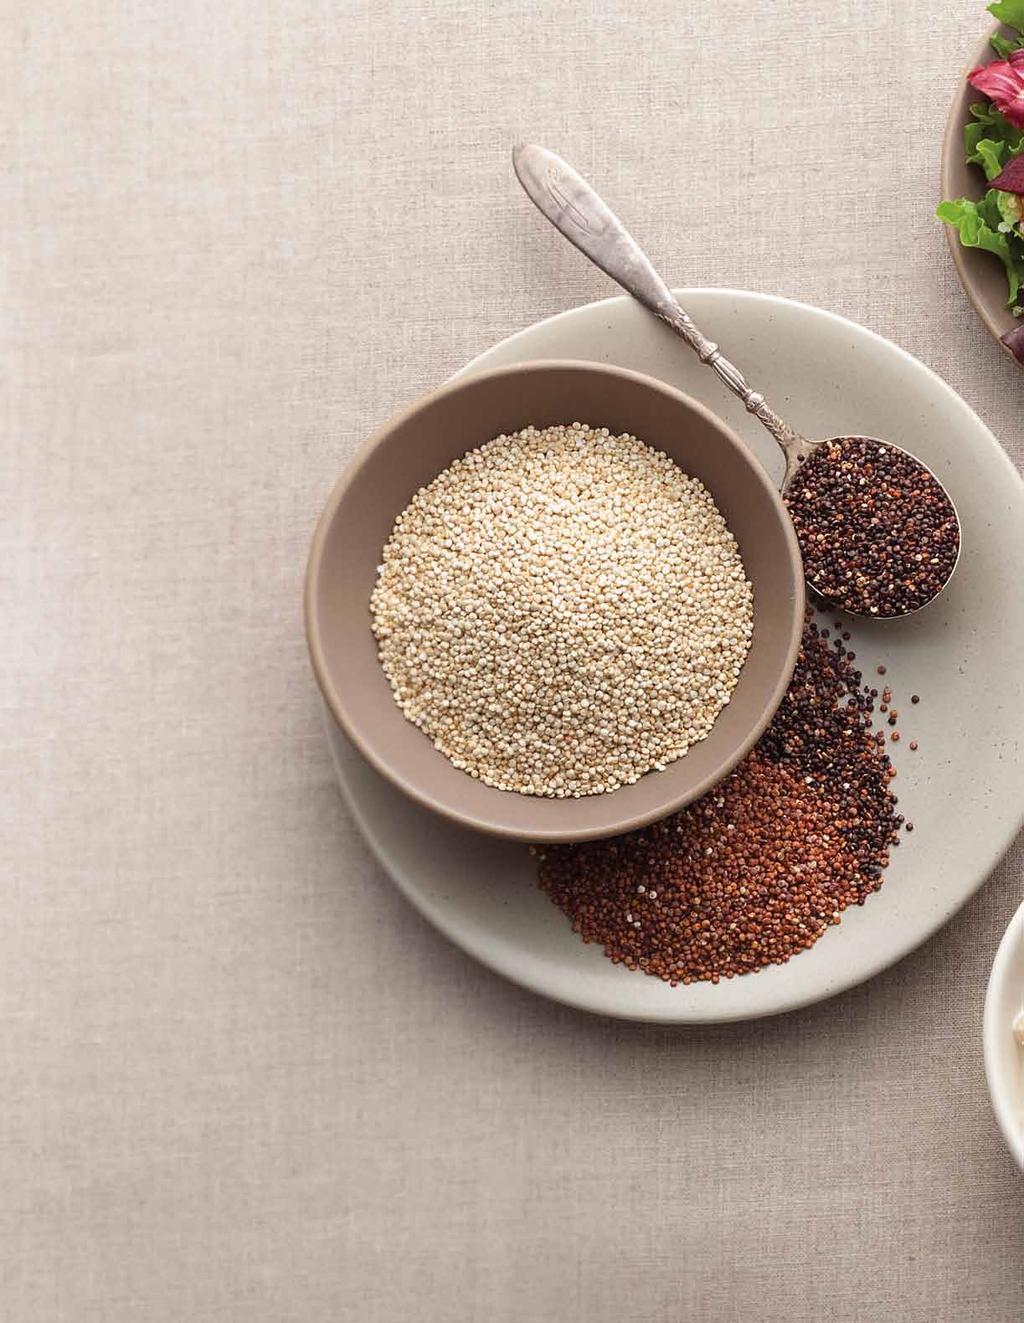 Quinoa: The Super Seed High in protein and glutenfree, quinoa is a nutritious seed that puts conventional whole grains to shame. By Karen Olson Call it the seed that eats like a grain.